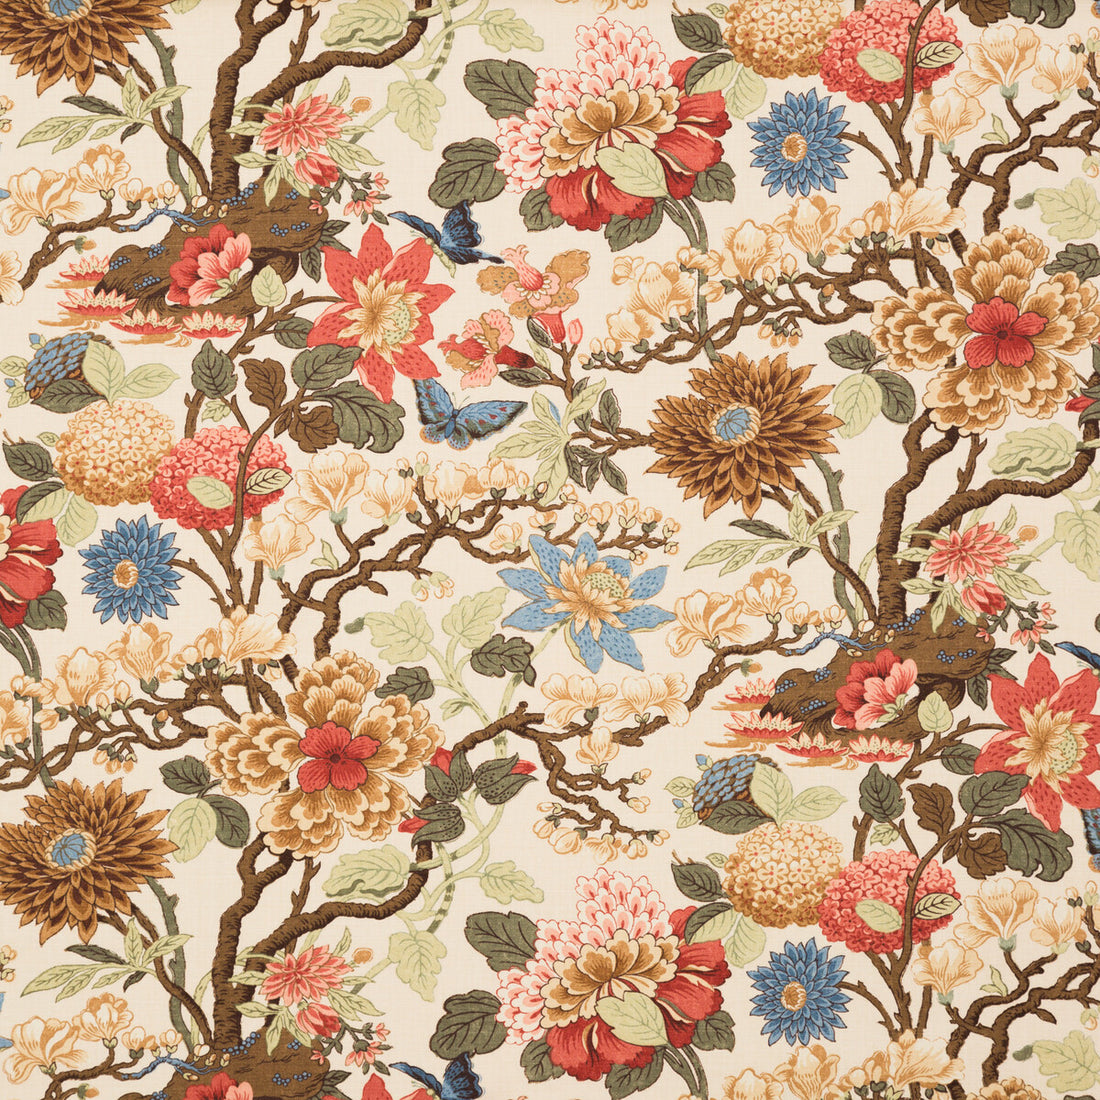 Magnolia fabric in biscuit/sand color - pattern R1351.2.0 - by G P &amp; J Baker in the Baker Originals collection